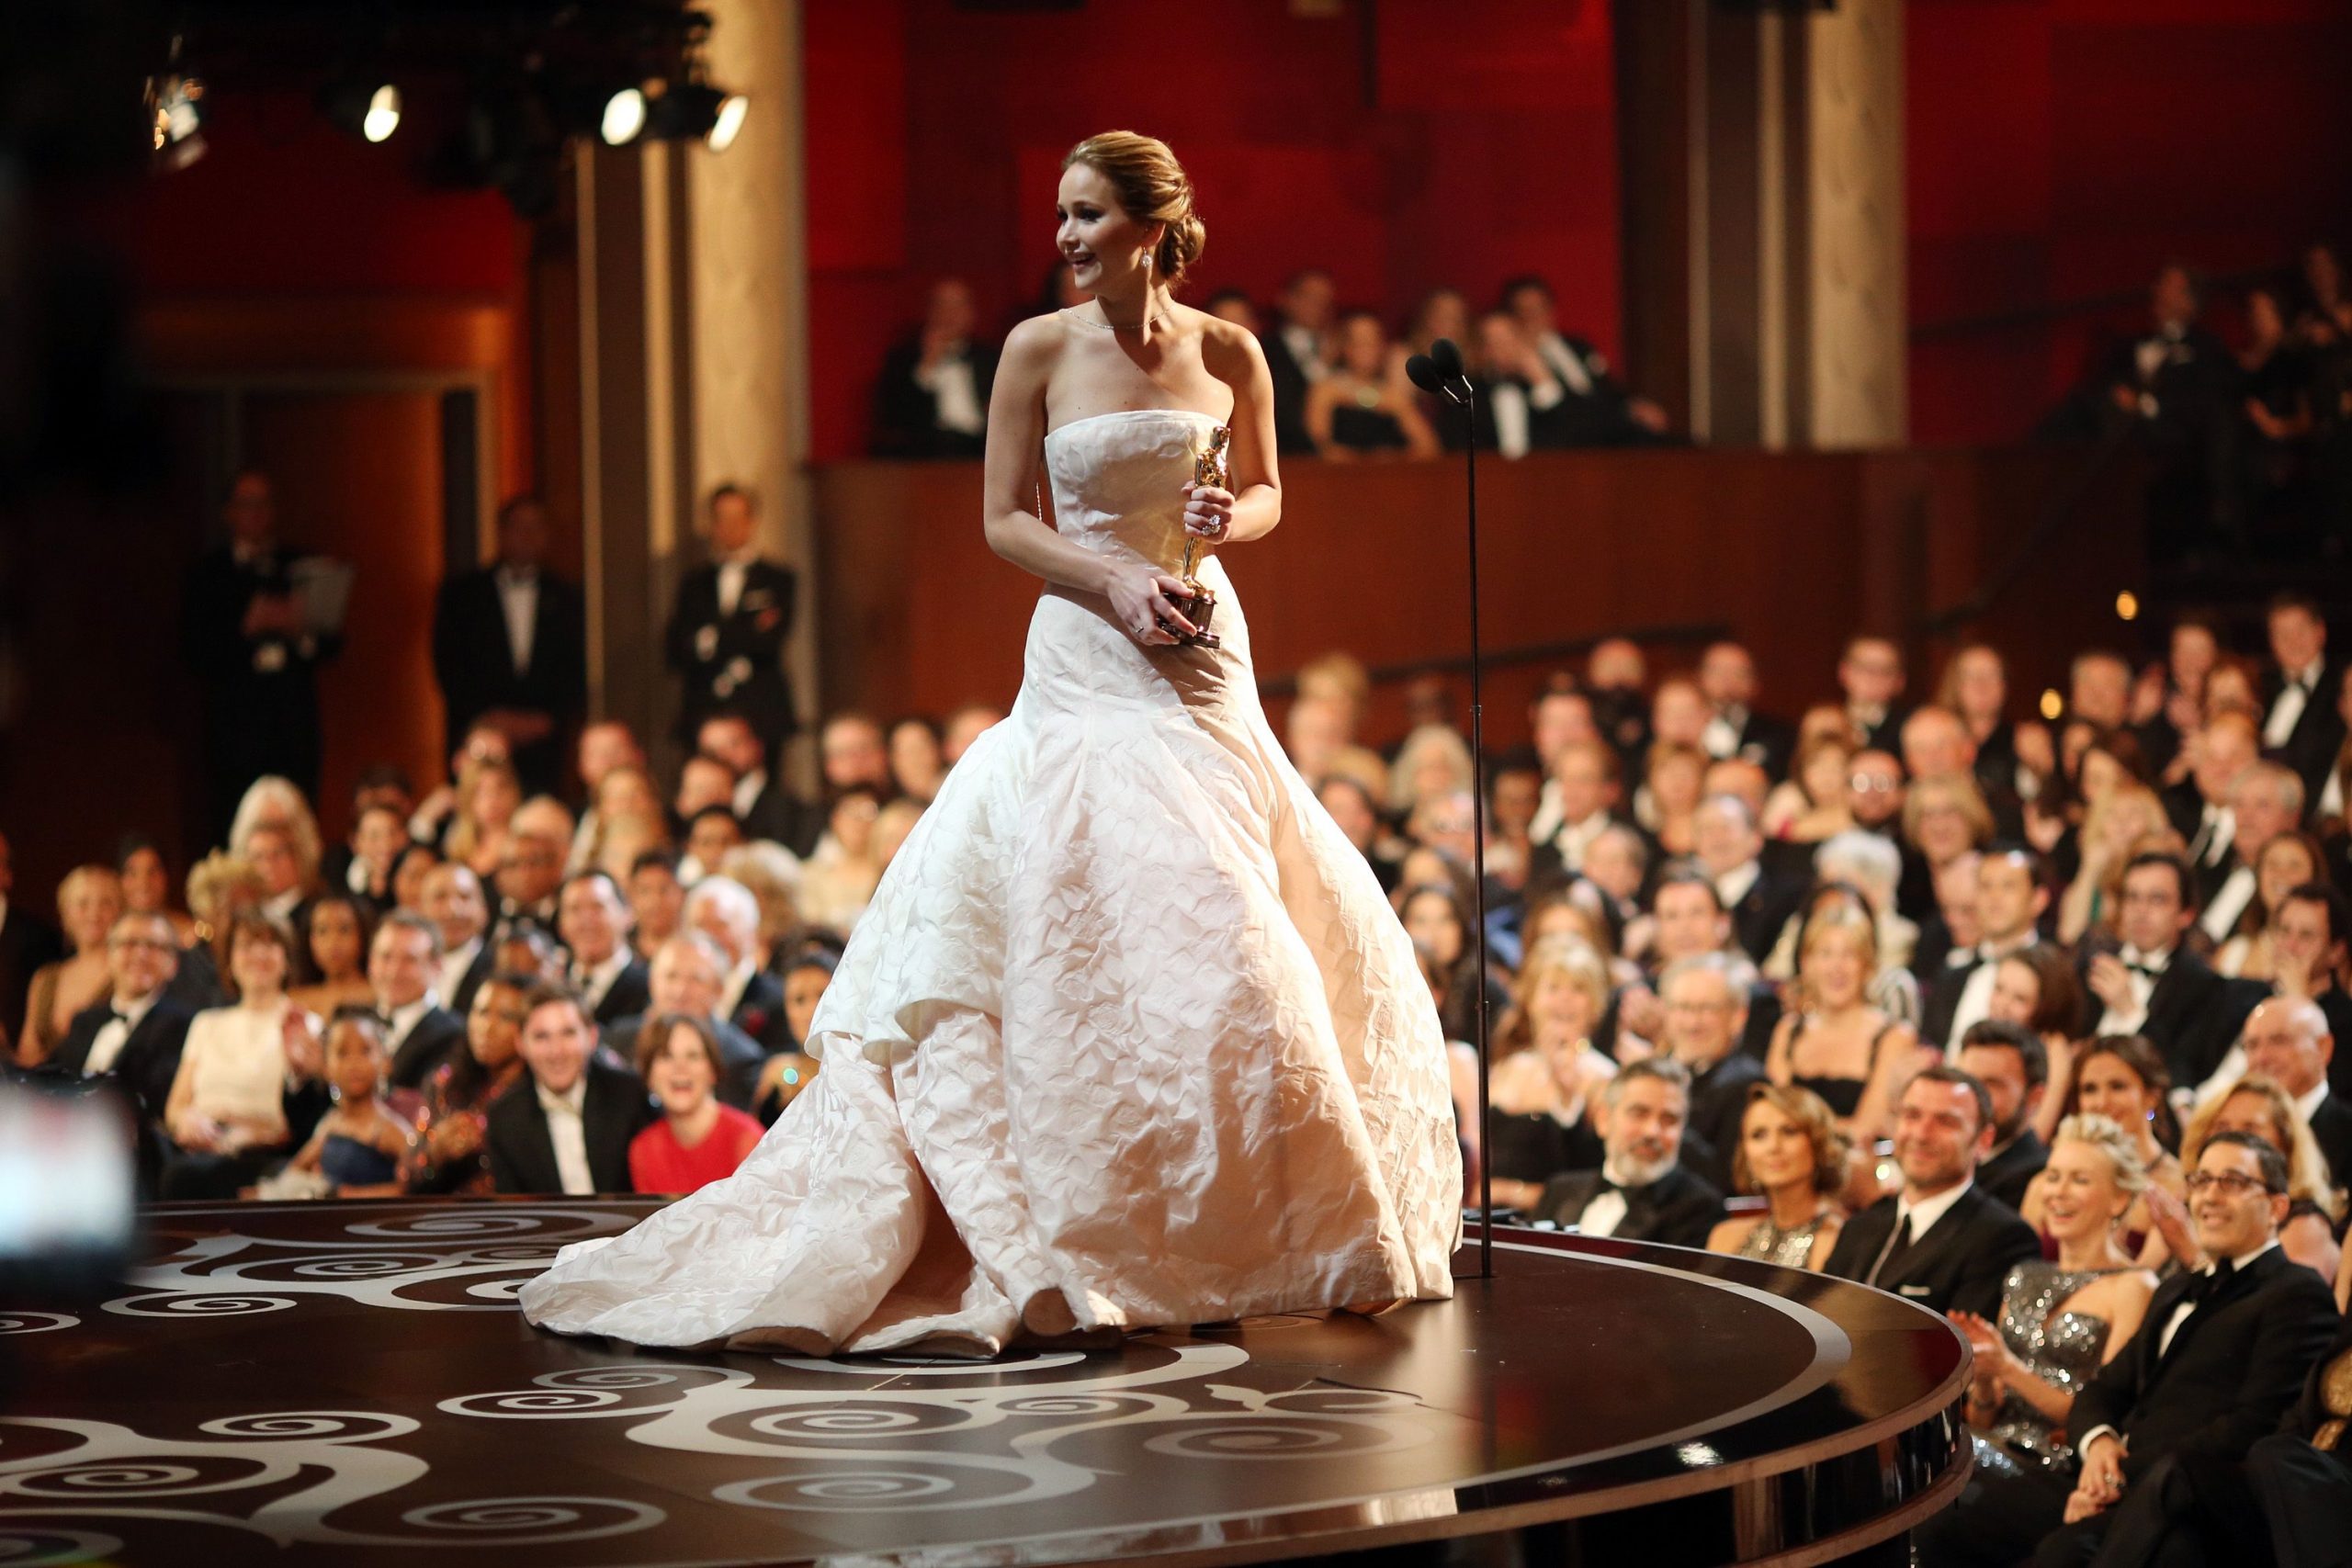 In a new podcast, Jennifer Lawrence reflected on her 2013 viral fall at the Academy Awards. (Photo: Stephane Cardinale - Corbis/Corbis via Getty Images)